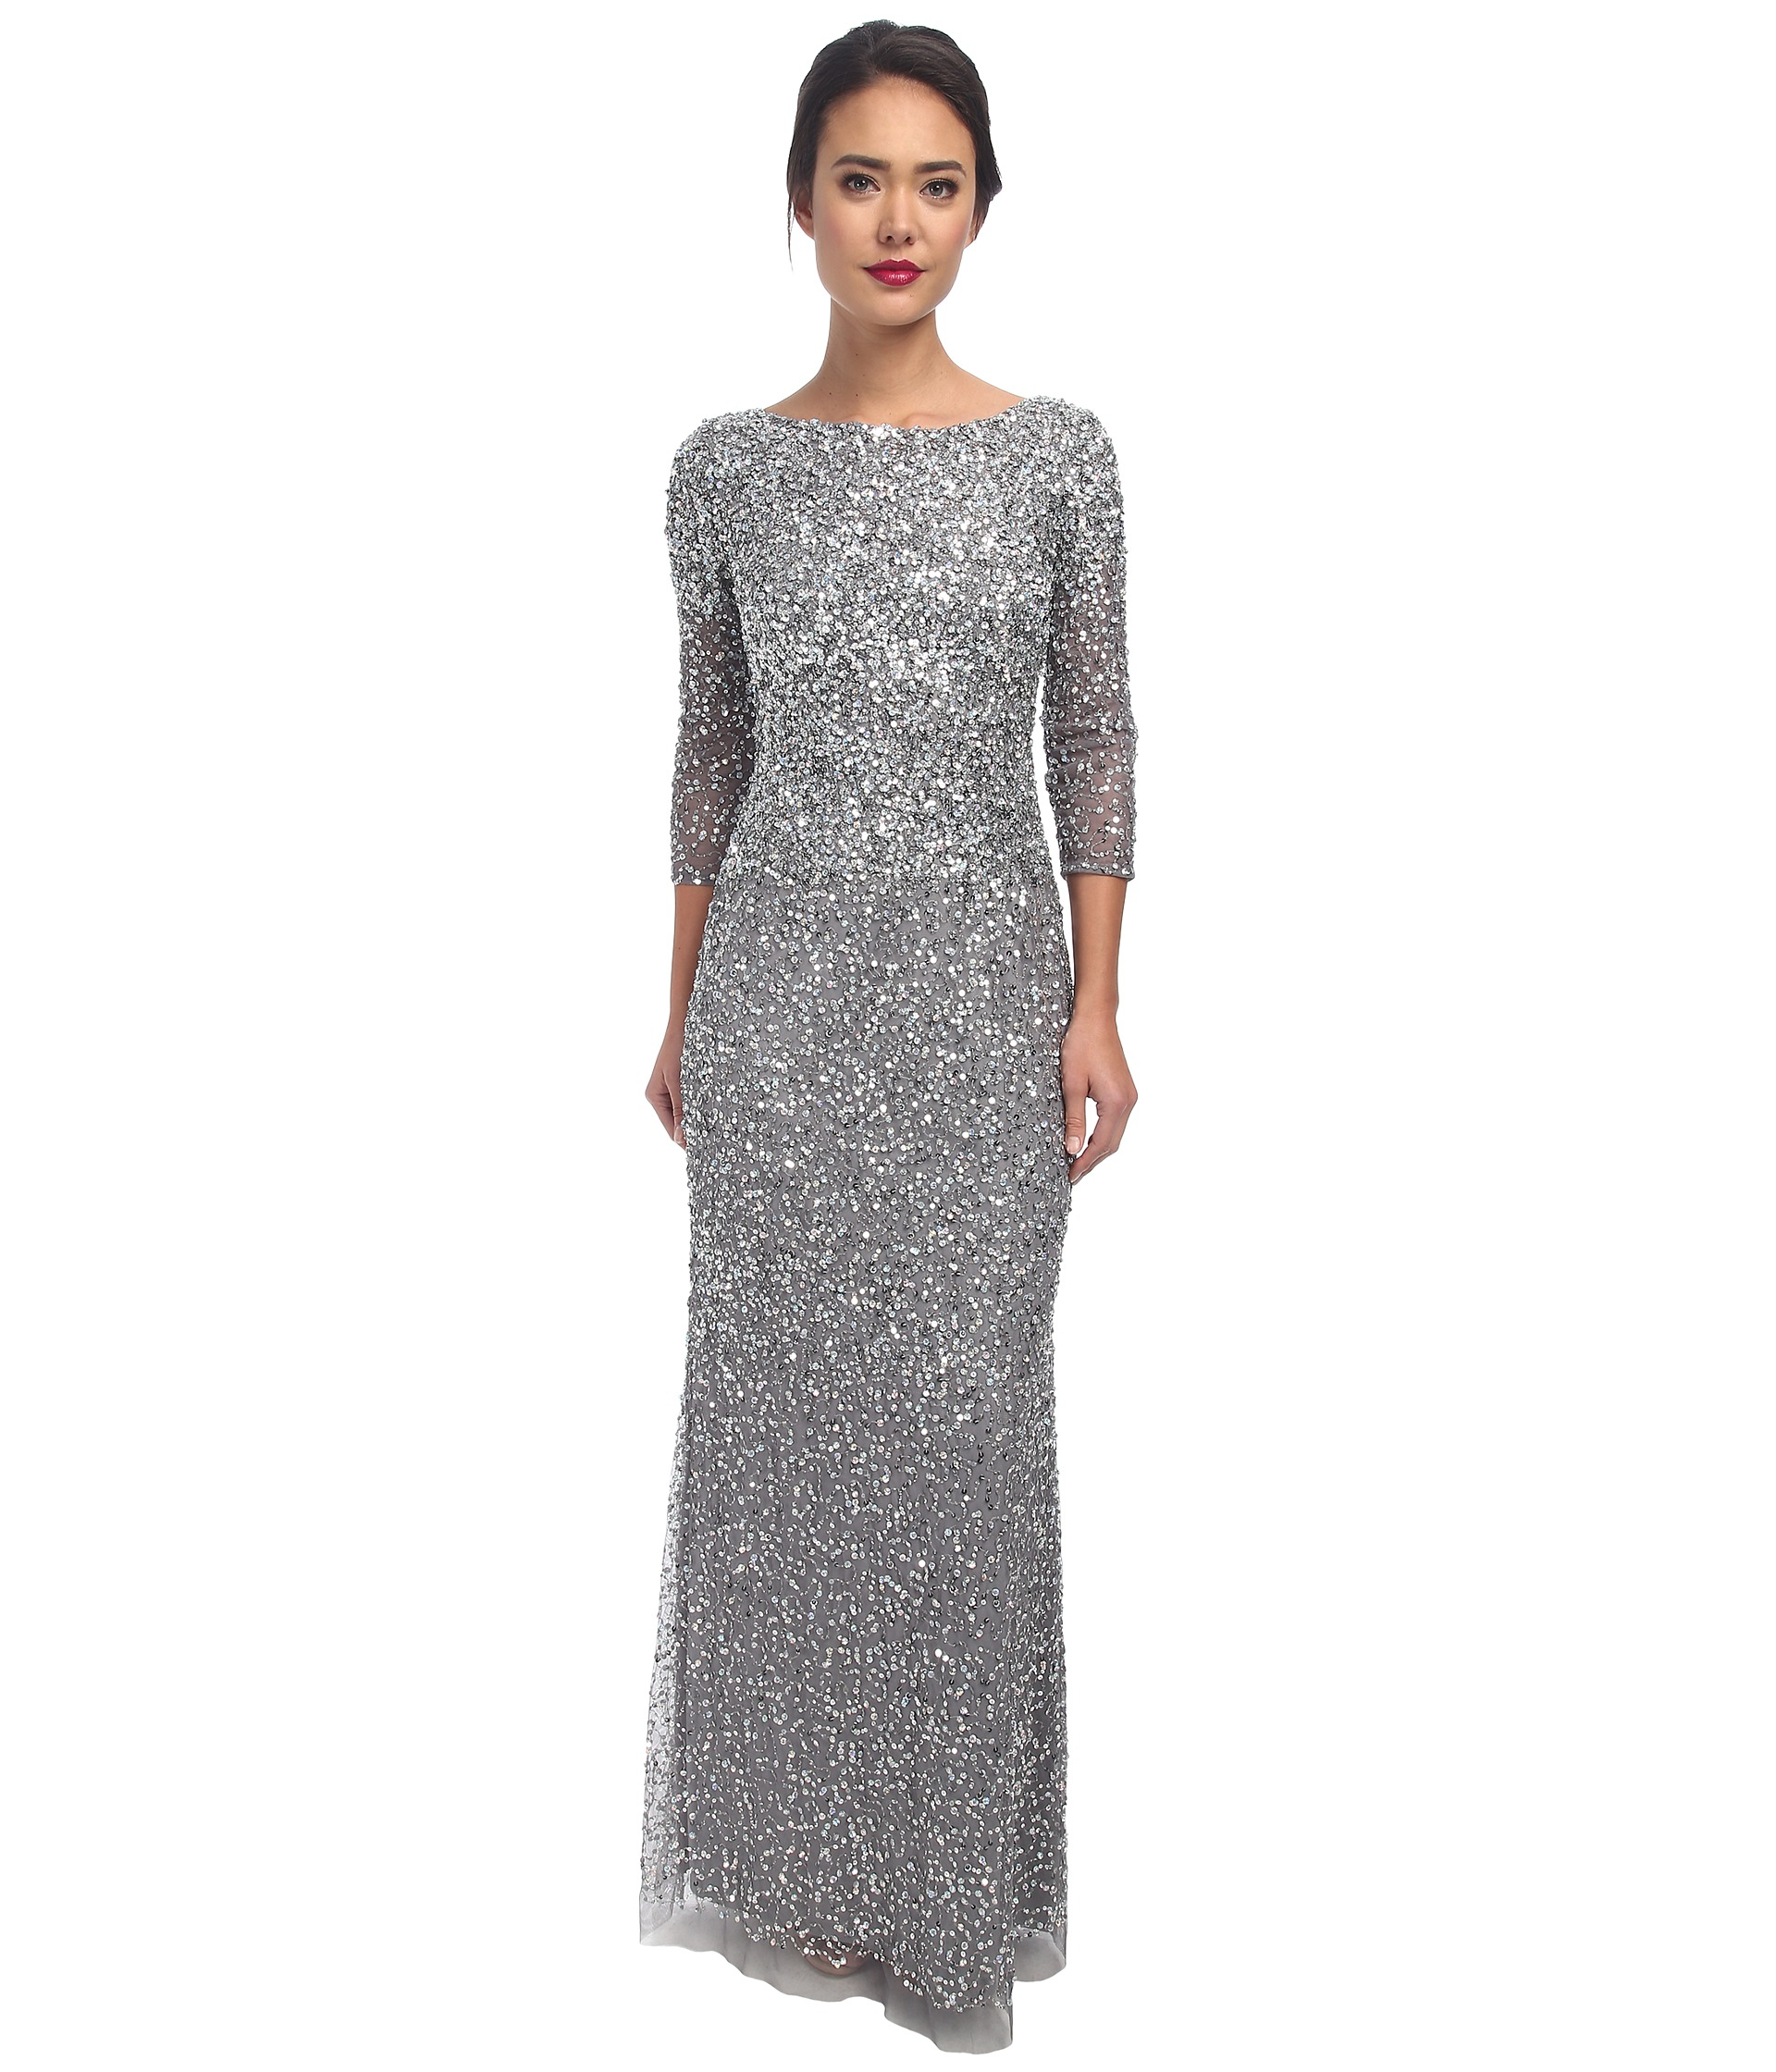 Adrianna Papell Long Sequin Dress in ...